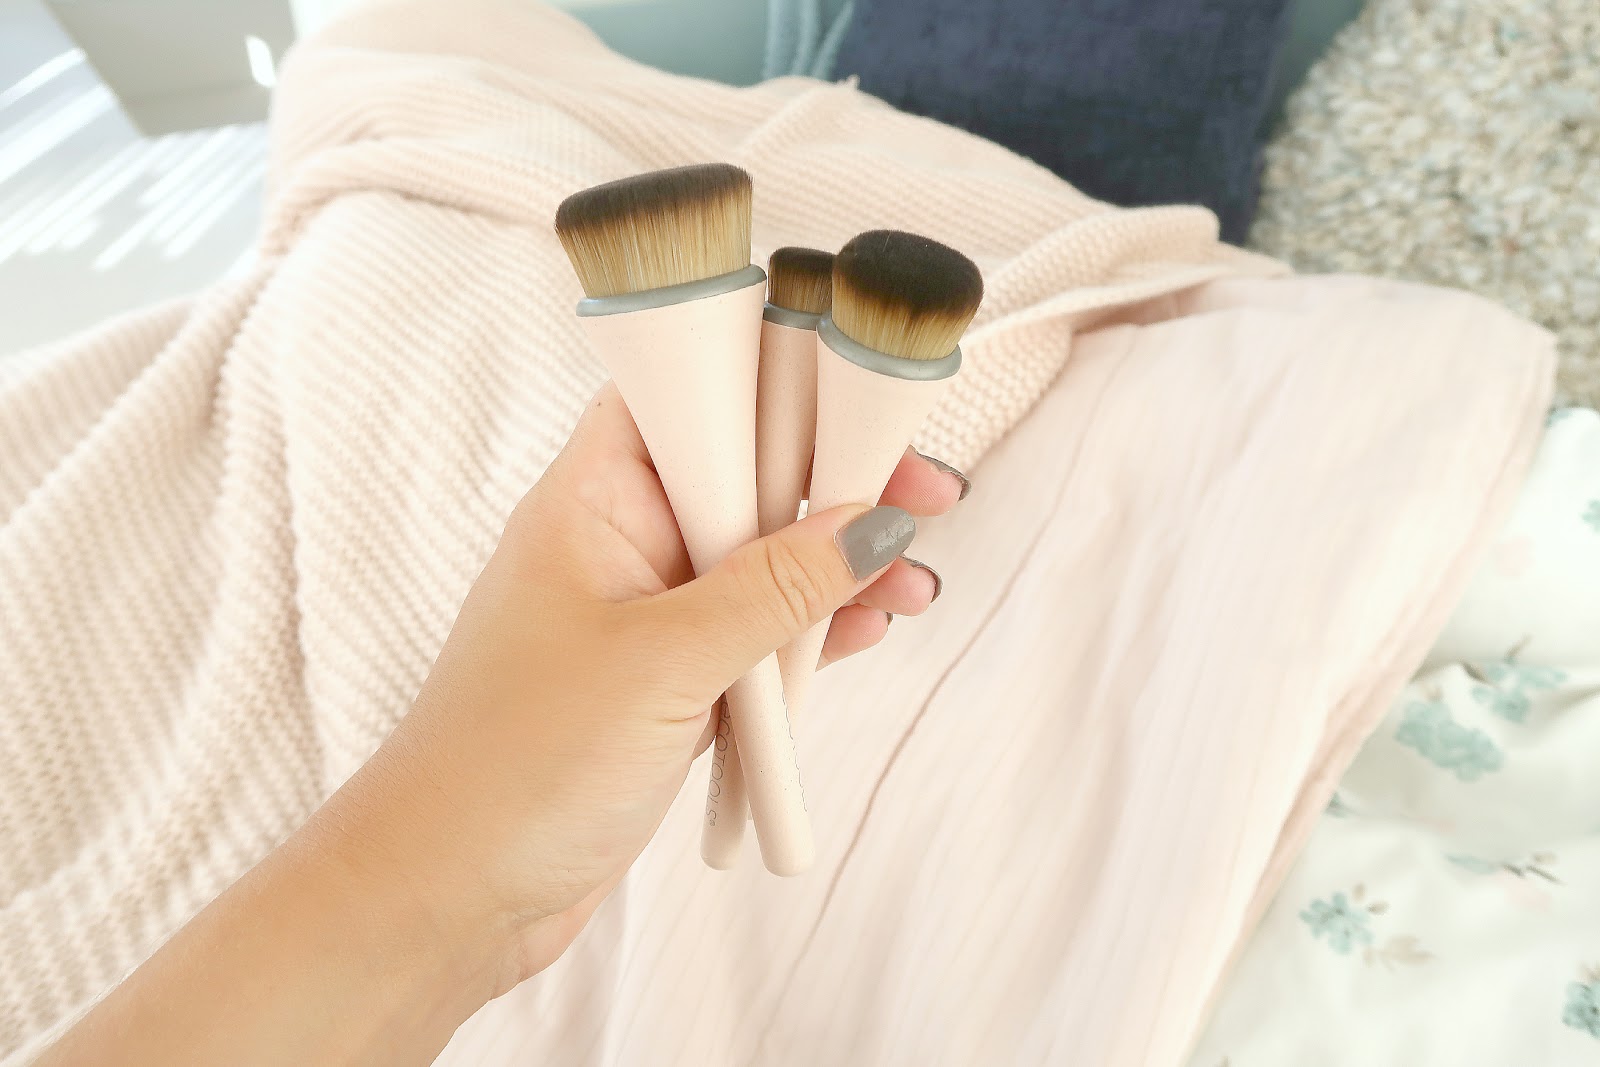 EcoTools concealer brush - Reviews